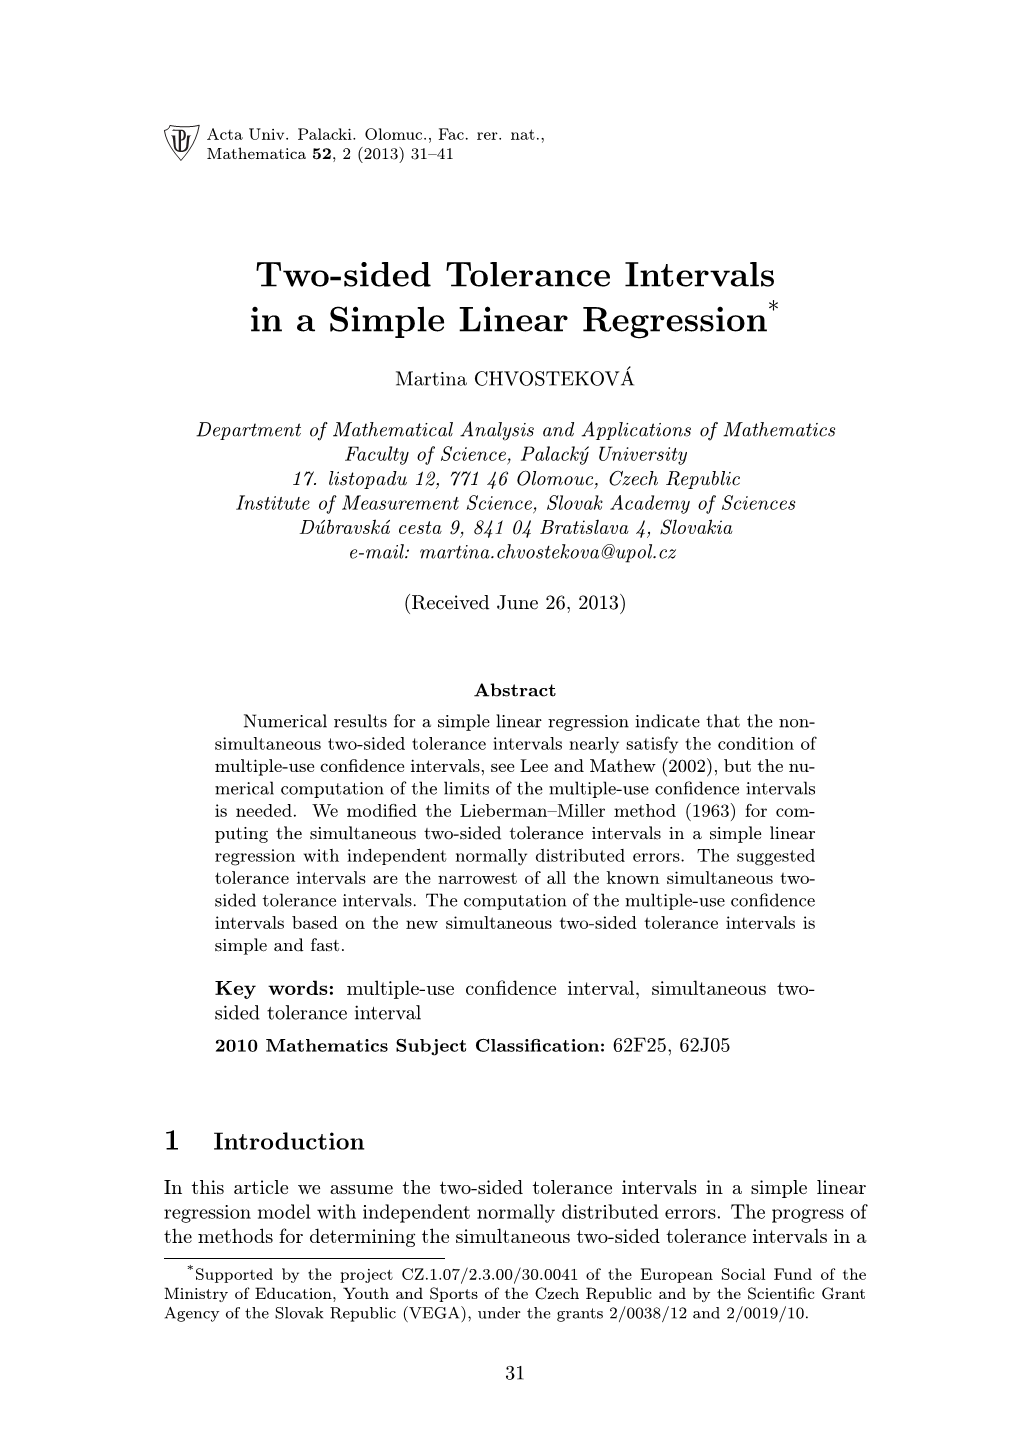 Two-Sided Tolerance Intervals in a Simple Linear Regression*